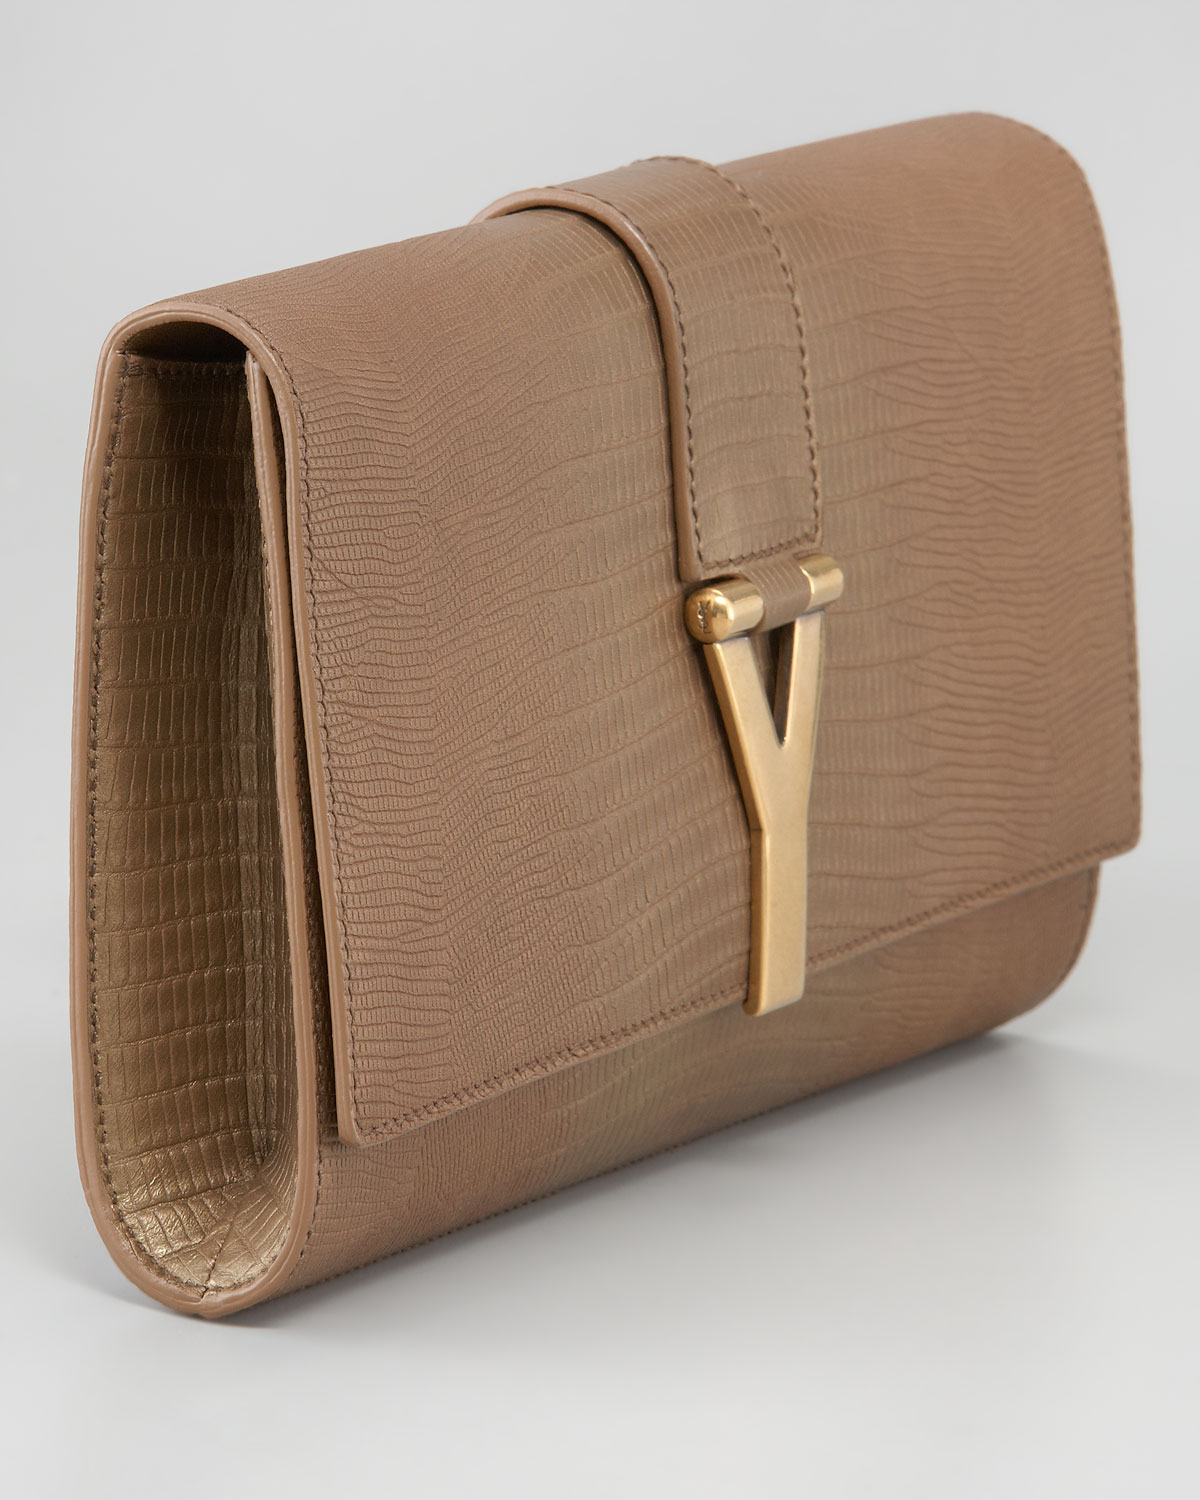 Saint laurent Chyc Embossed Metallic Leather Clutch in Brown (gold ...